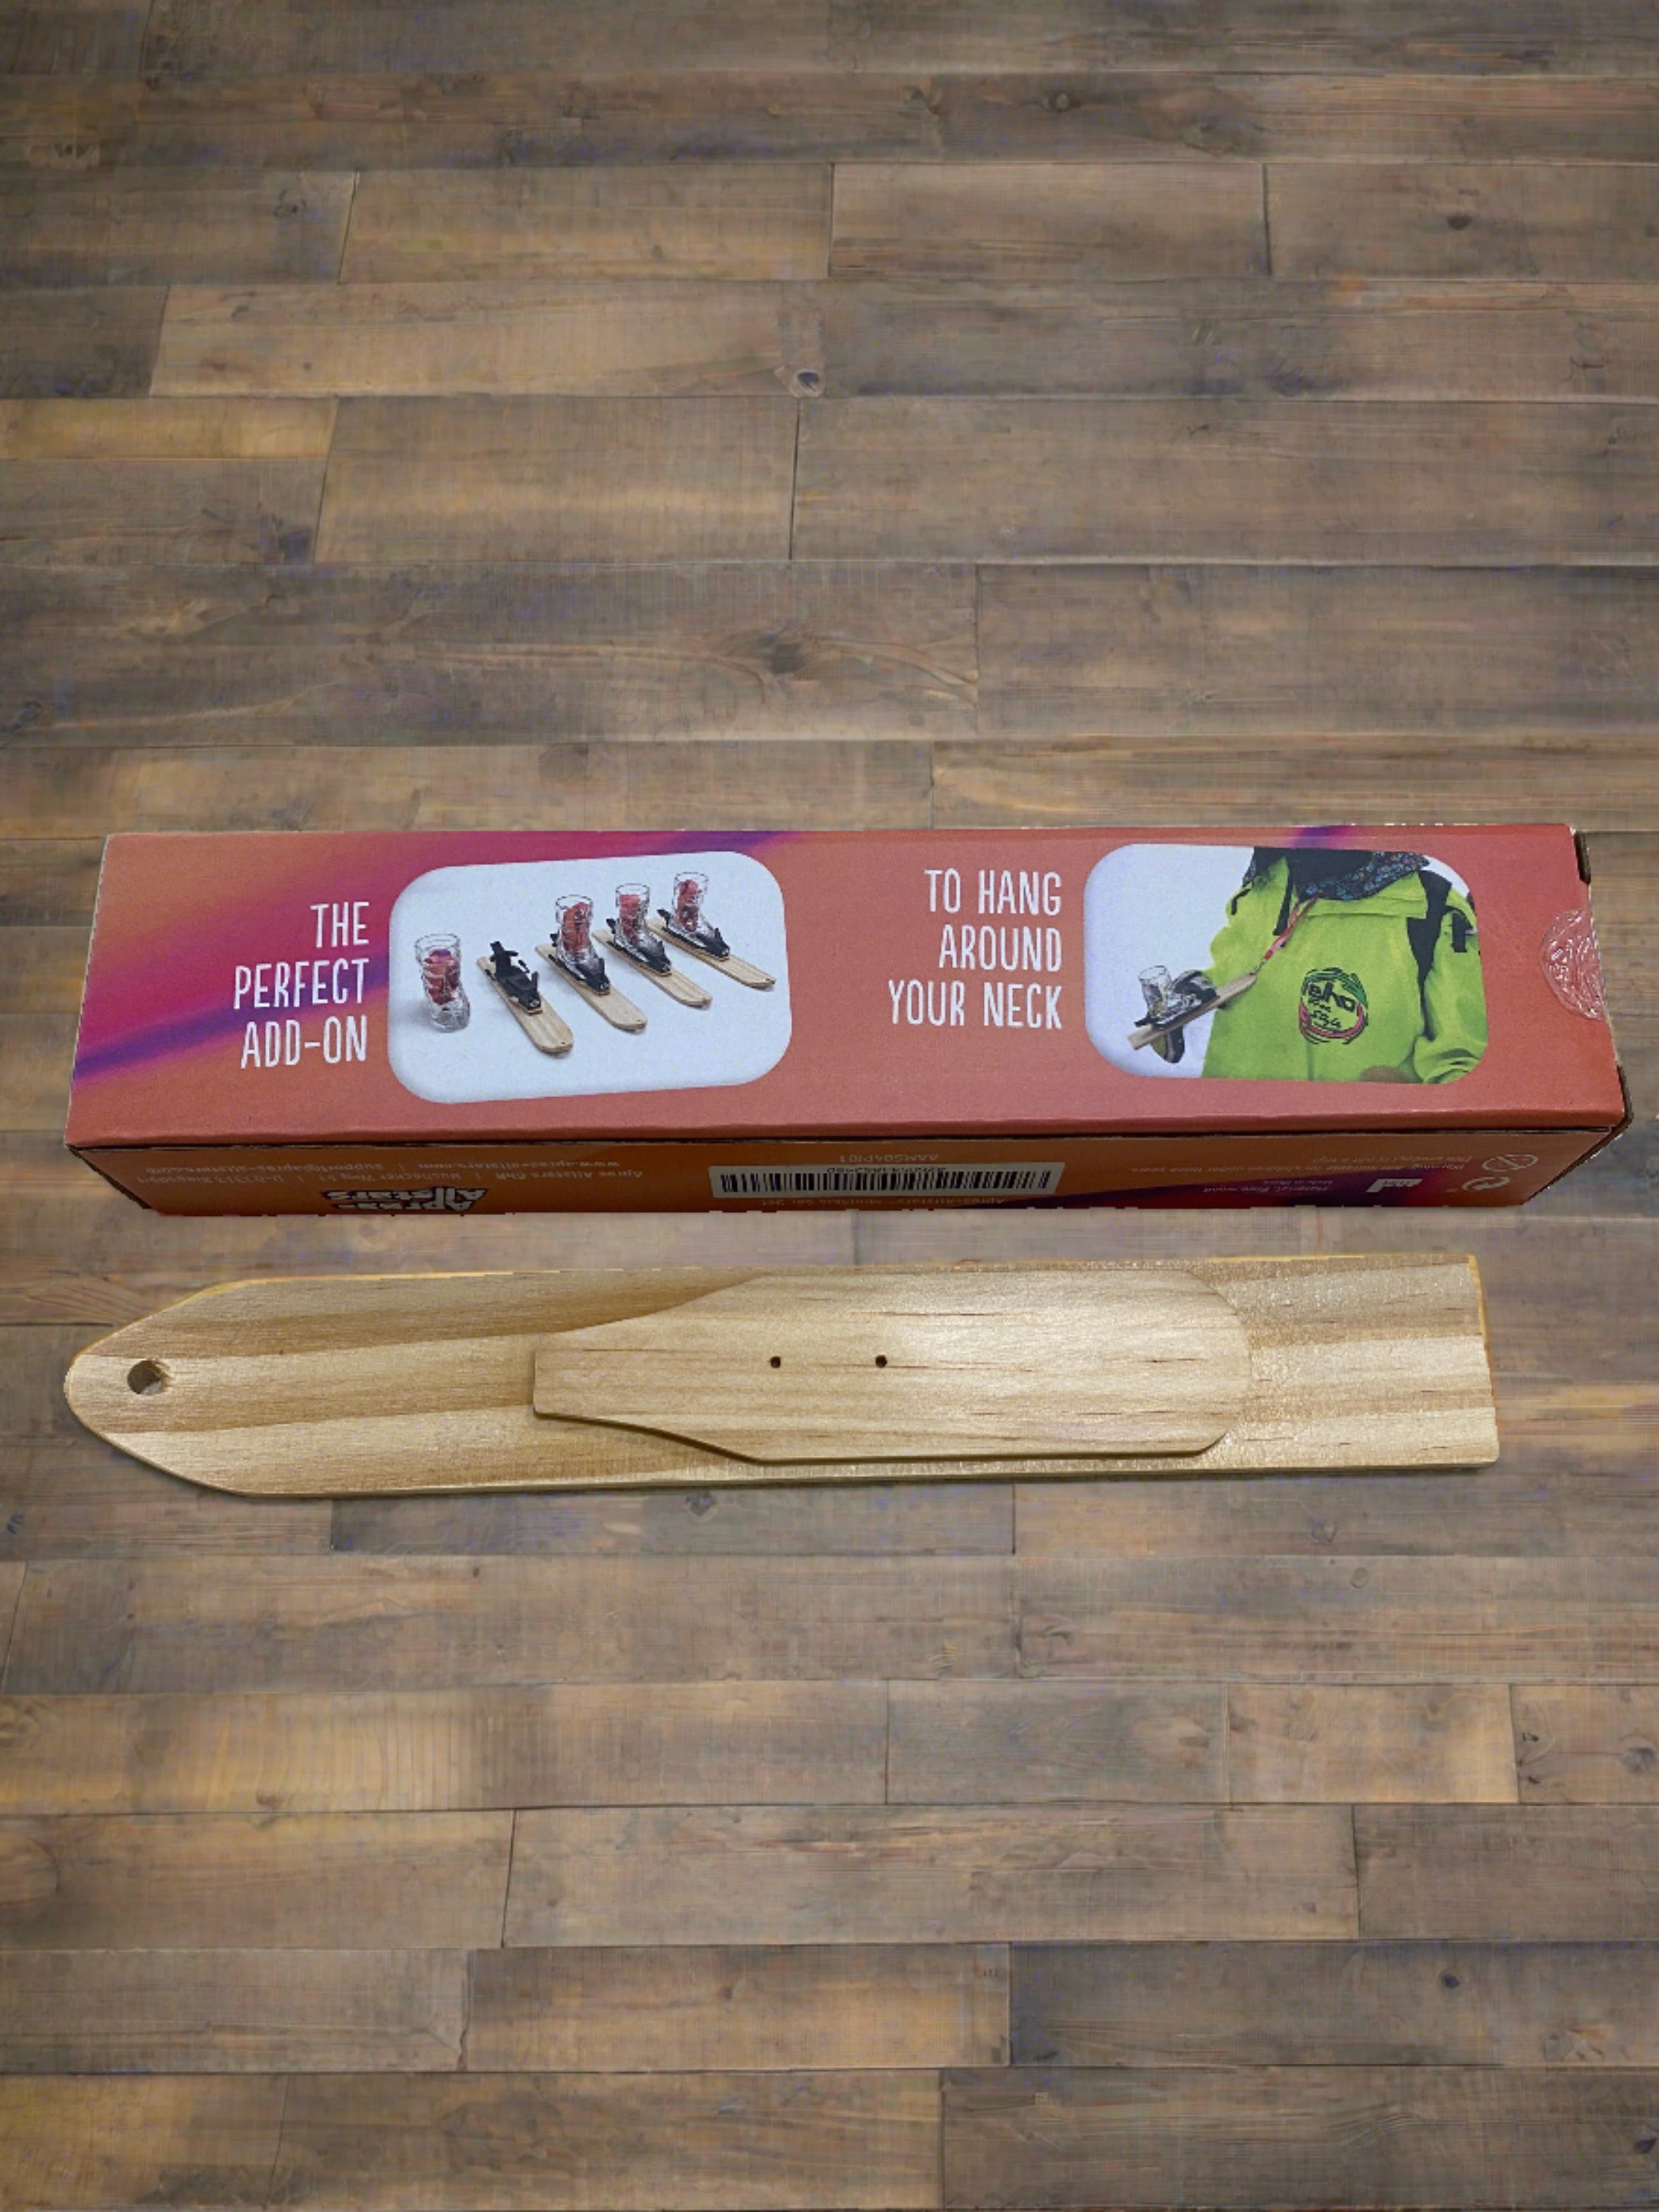 Photo of a wooden tray in the shape of small ski & the box it comes in. The ski tray has a hole drilled into the tip of the ski and a small raised mounting platform for the Apres Allstar boot shot glass and bindings. Image is set against a wooden backdrop